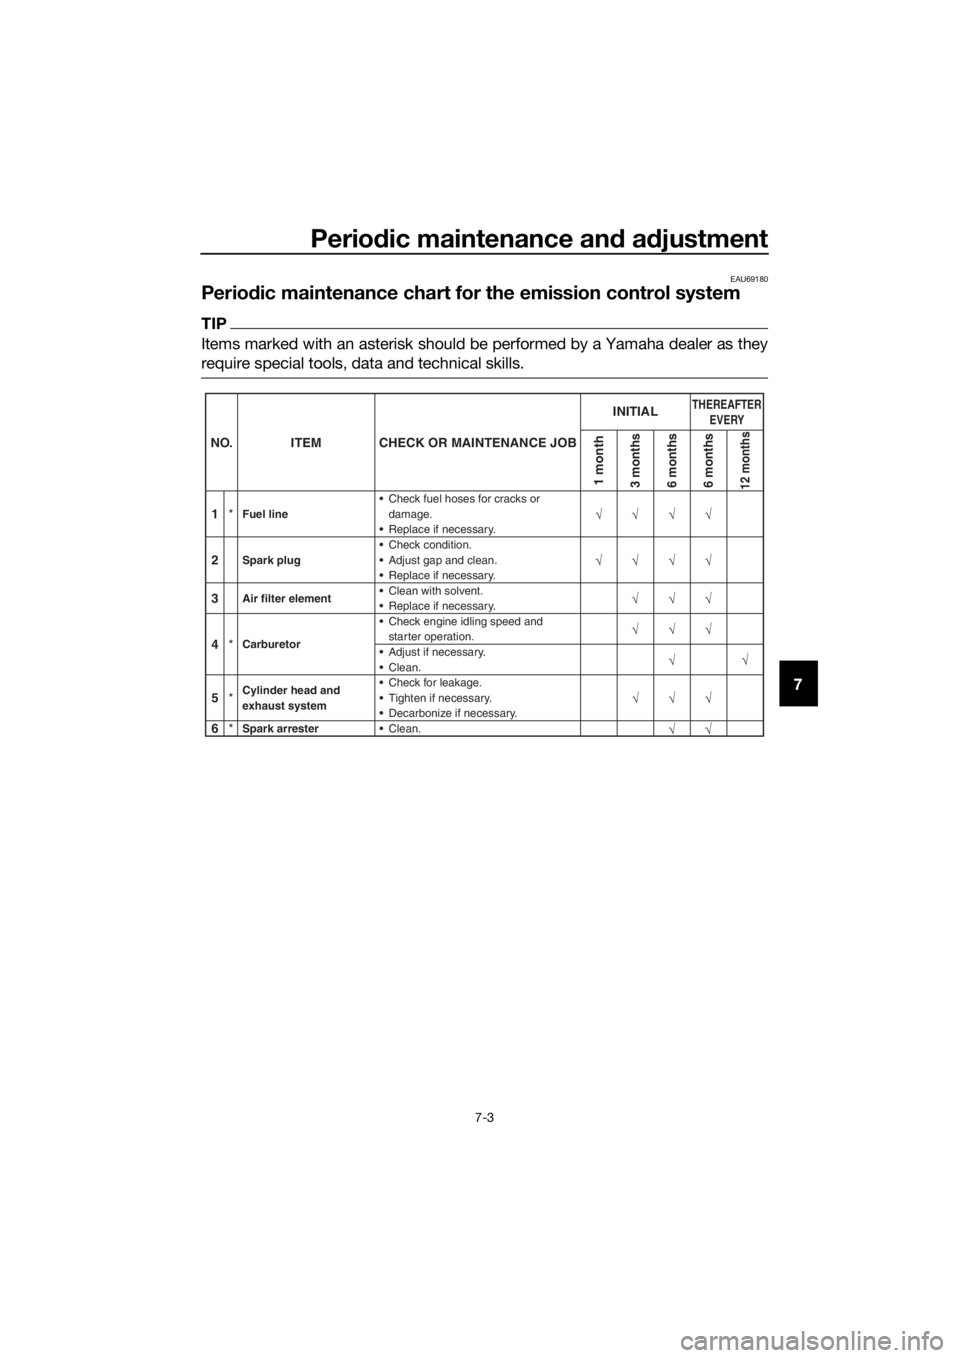 YAMAHA PW50 2019  Owners Manual Periodic maintenance an d a djustment
7-3
7
EAU69180
Perio dic maintenance chart for the emission control system
TIP
Items marked with an asterisk should be performed by a Yamaha dealer as they
requir